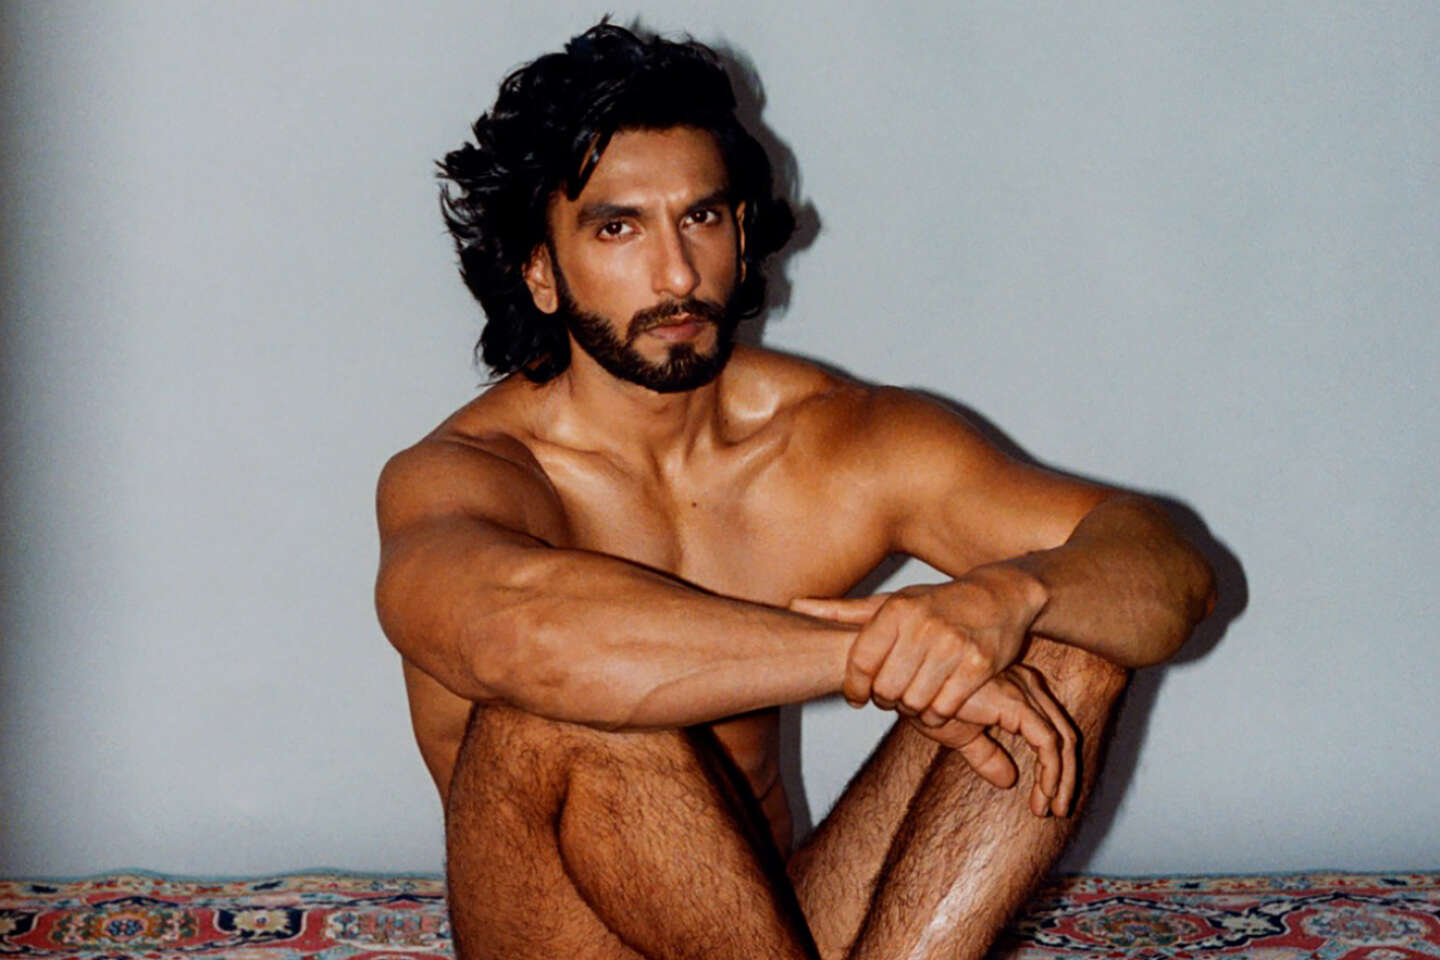 Nude photos of a Bollywood actor are setting India abuzz